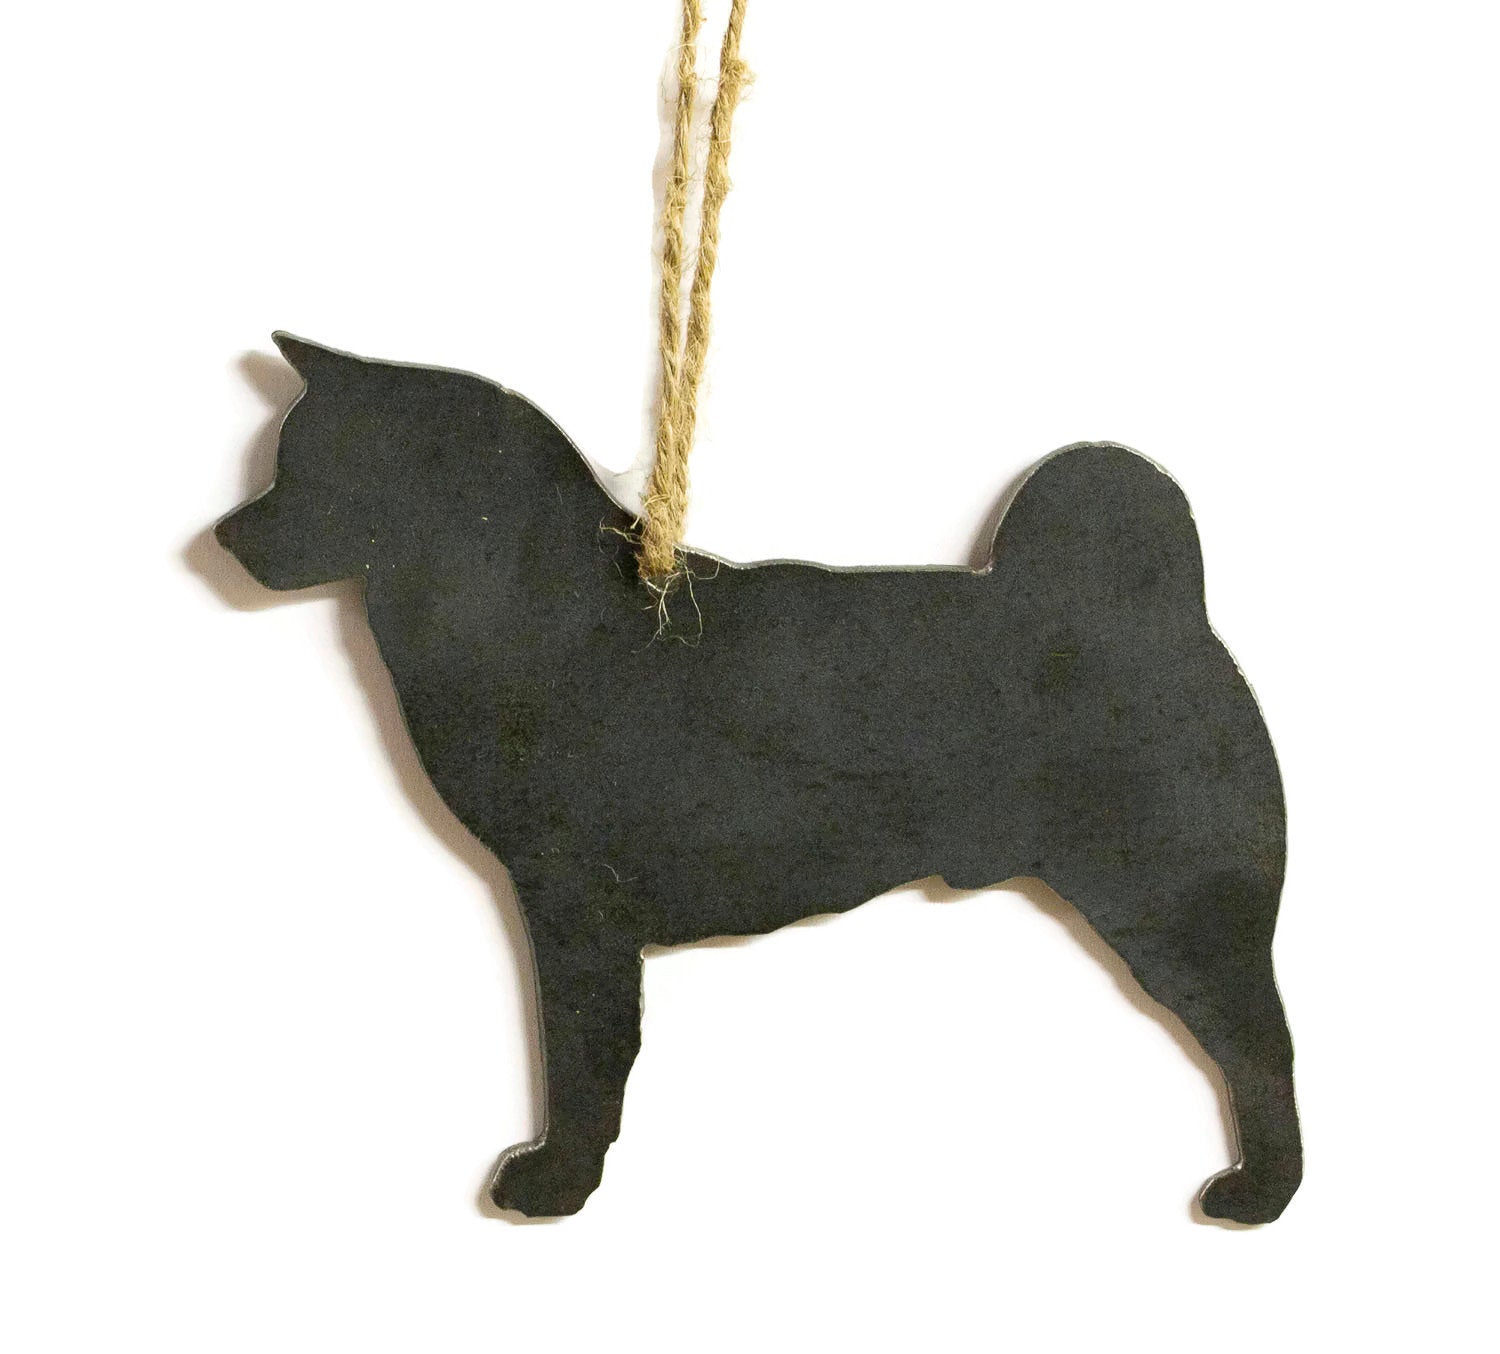 Akita Dog Metal Christmas Ornament Tree Stocking Stuffer Party Favor Holiday Decoration Raw Steel Gift Recycled Nature Home Decor